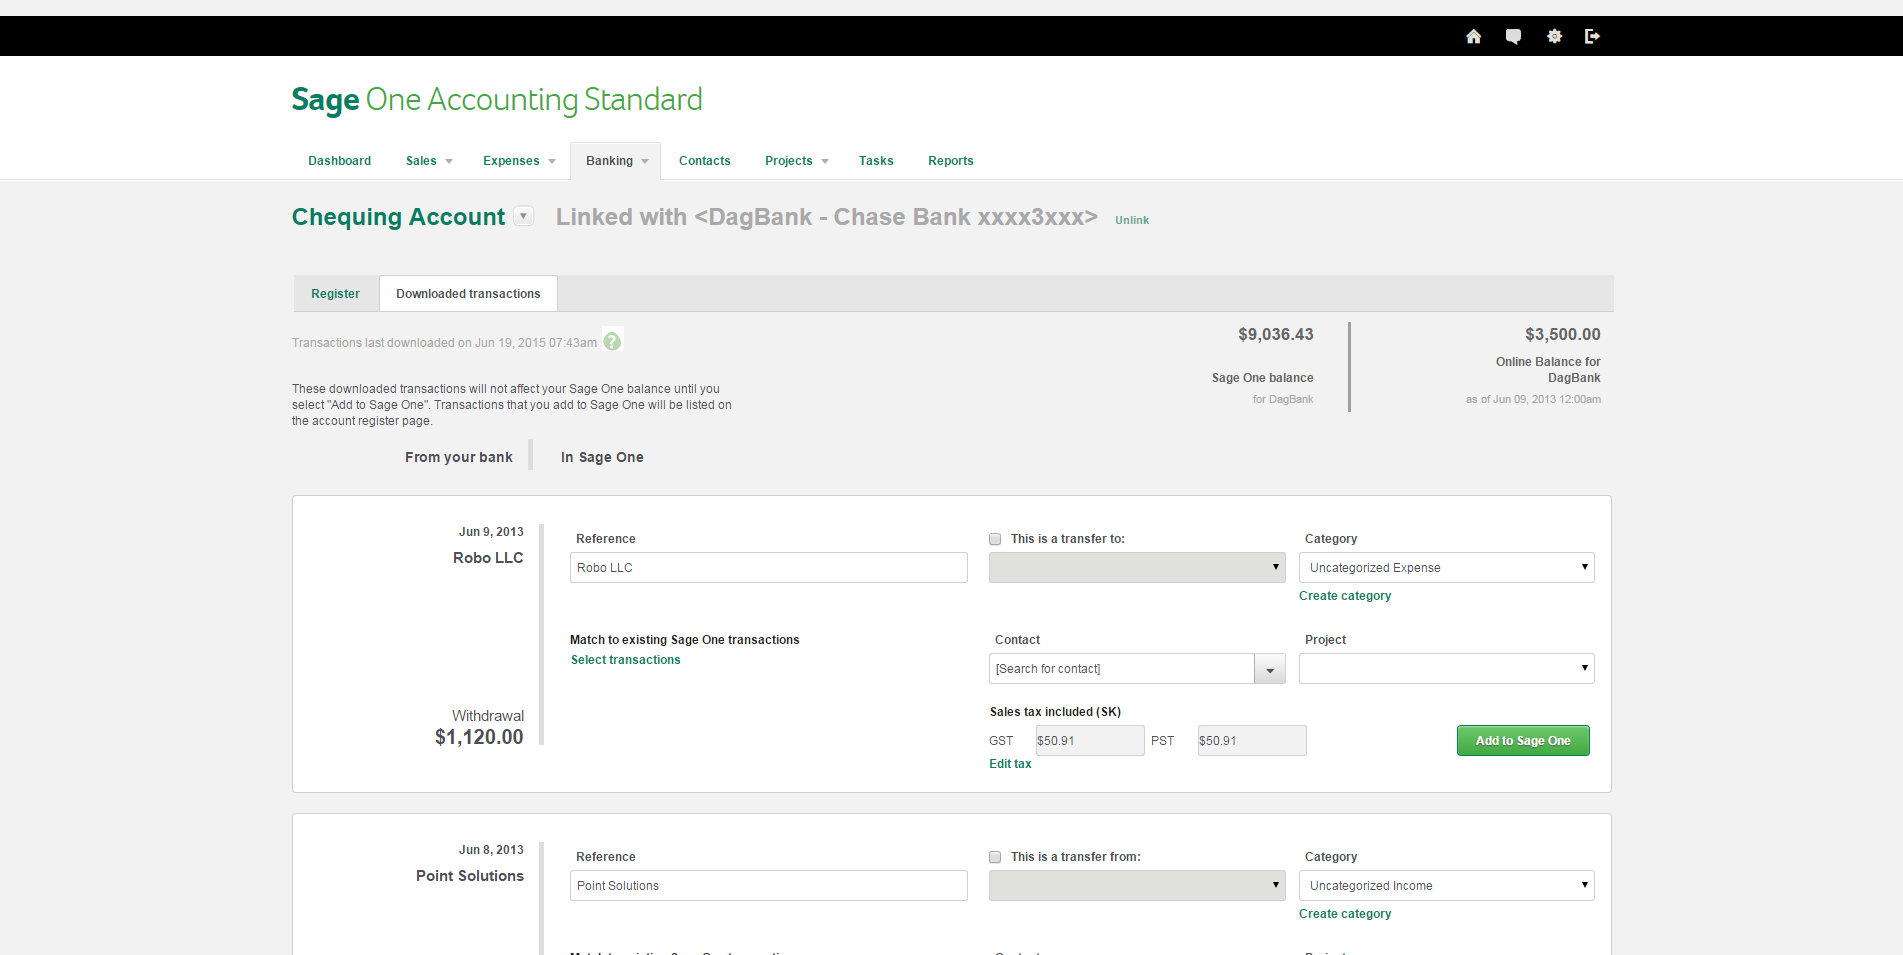 Sage One Accounting Premium look and feel strongly resembles software from the last decade.